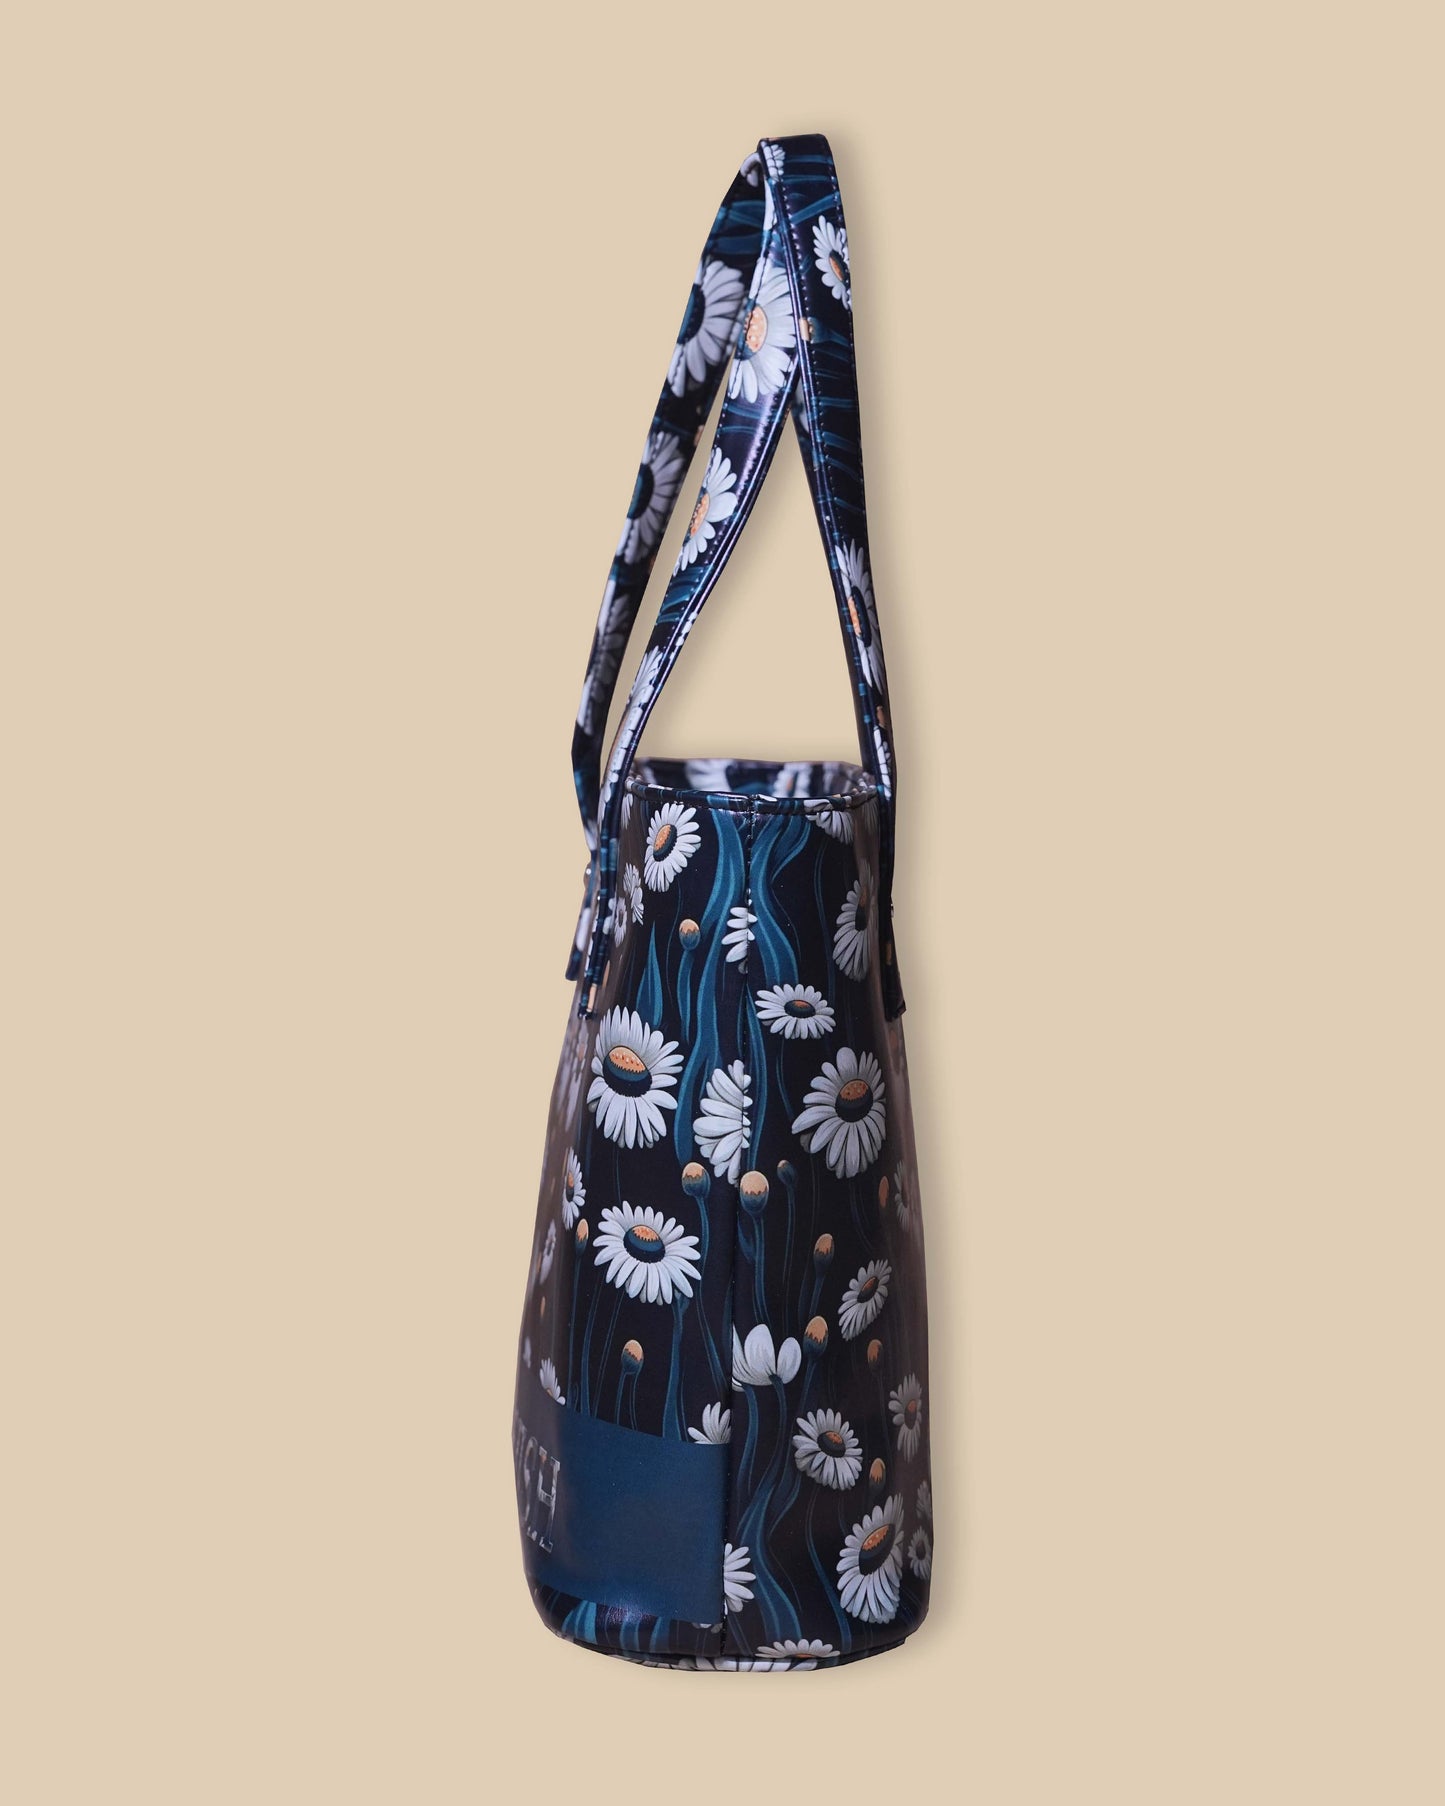 Customized Shoulder Tote Bag with Beautiful Floral design